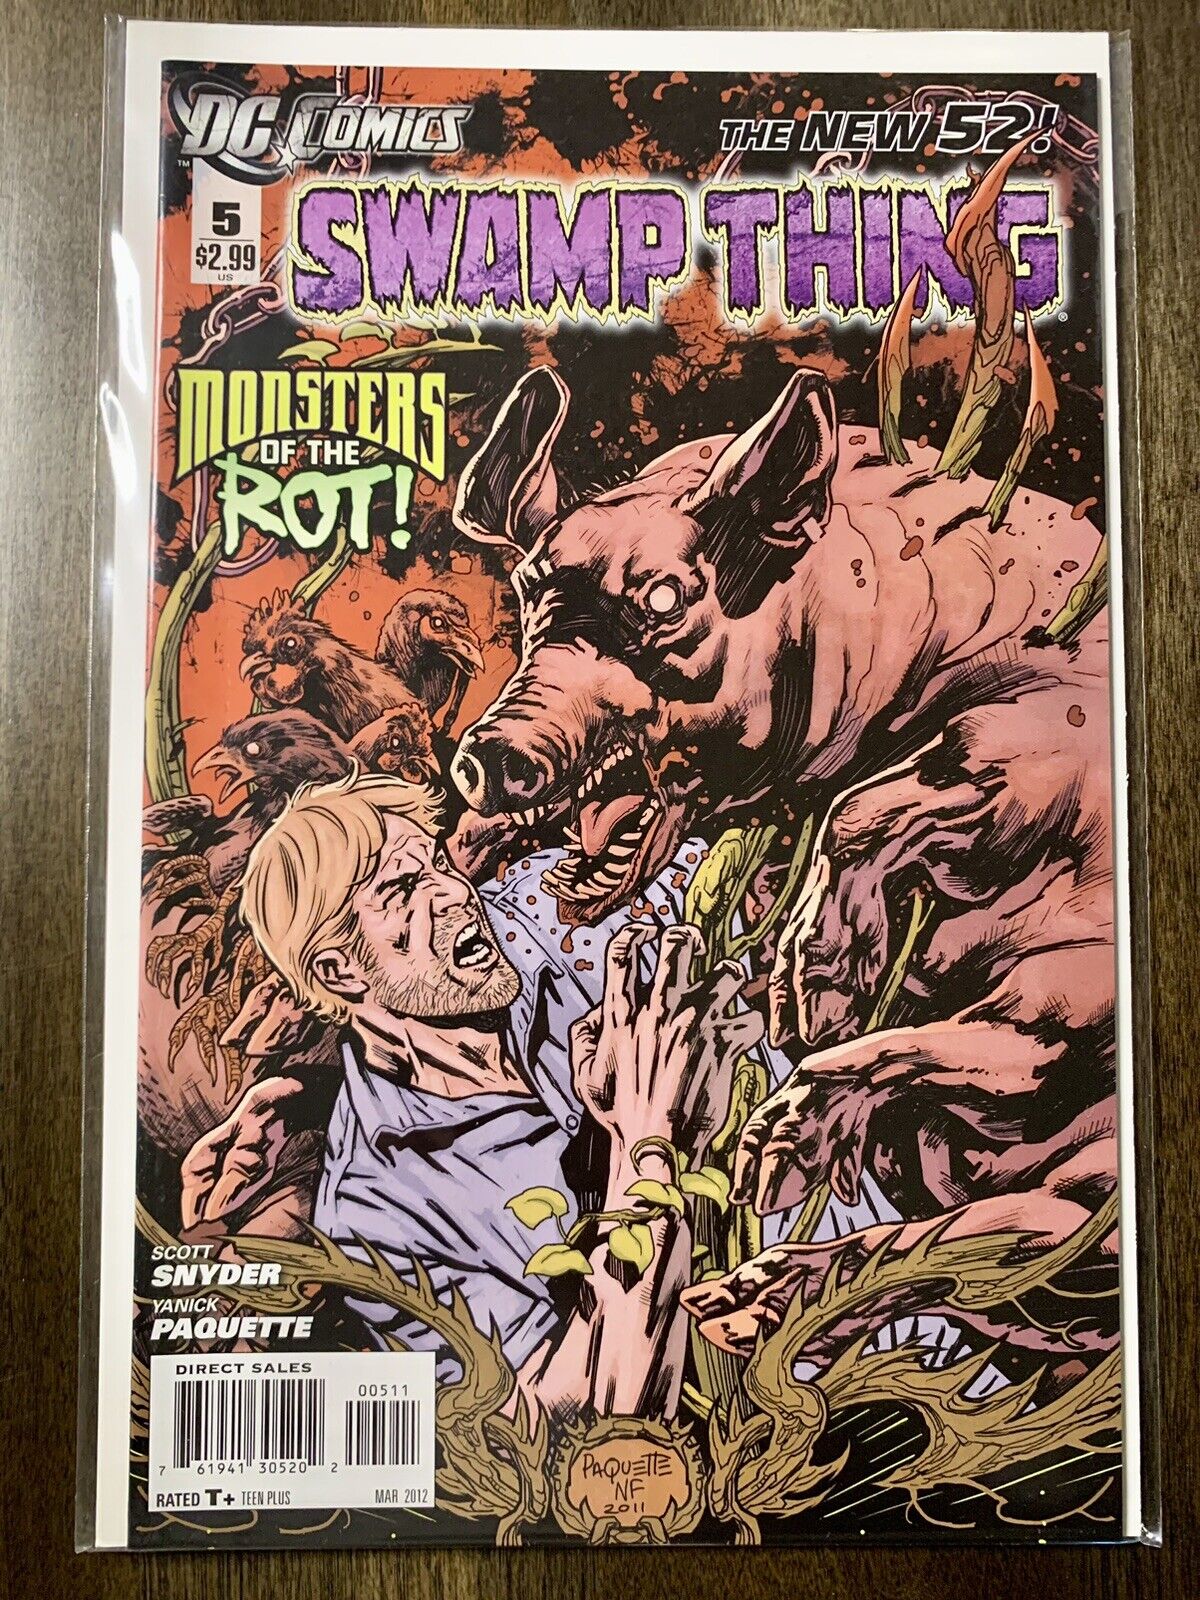 Swamp Thing #5 (DC Comics, March 2012) Comic Book